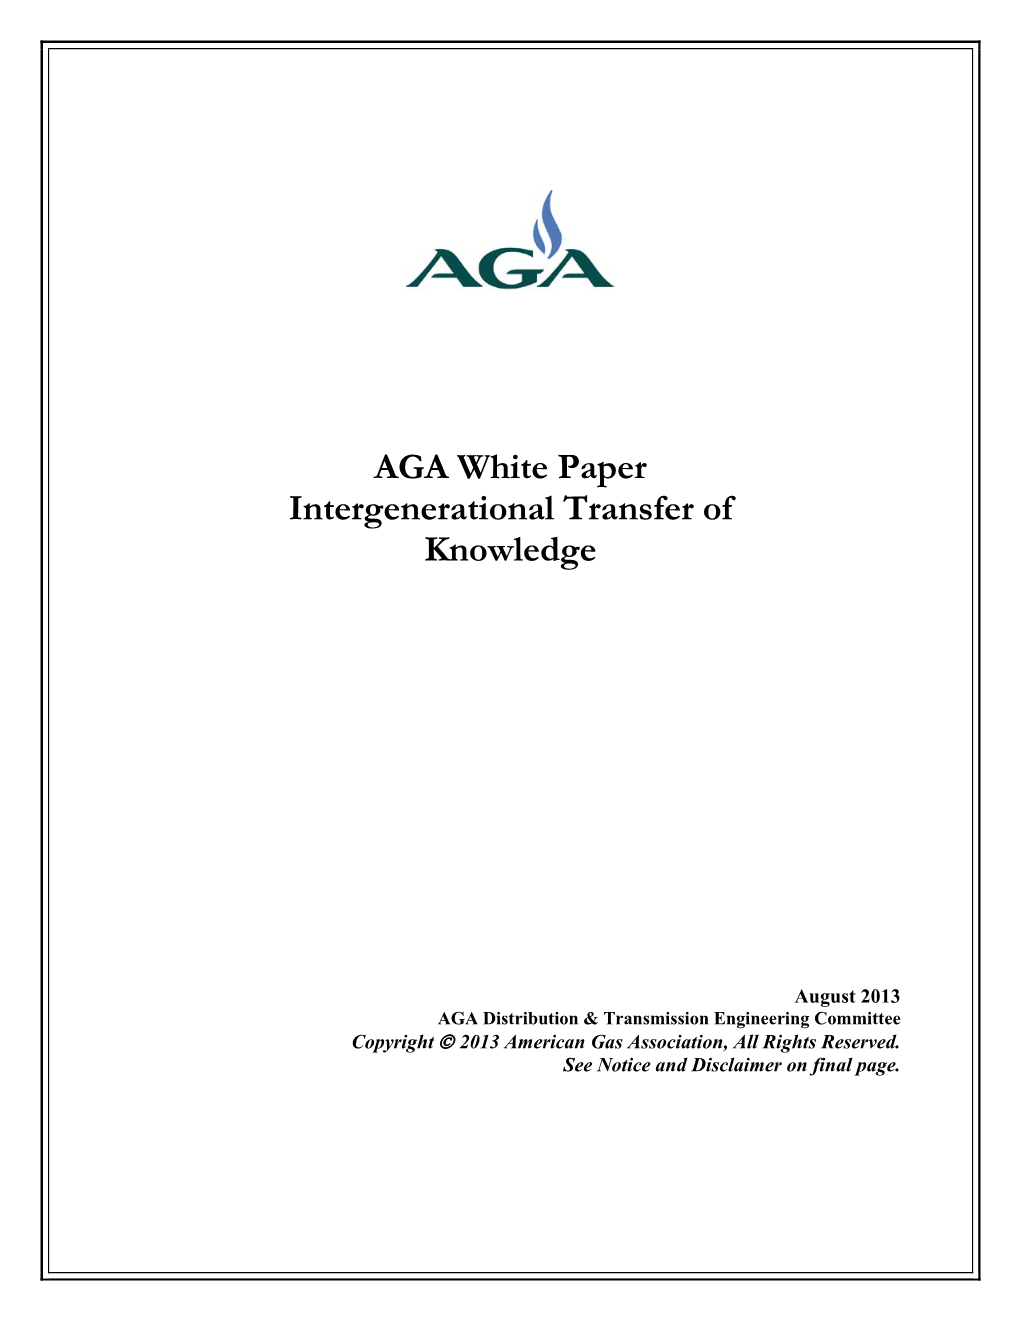 AGA White Paper Intergenerational Transfer of Knowledge